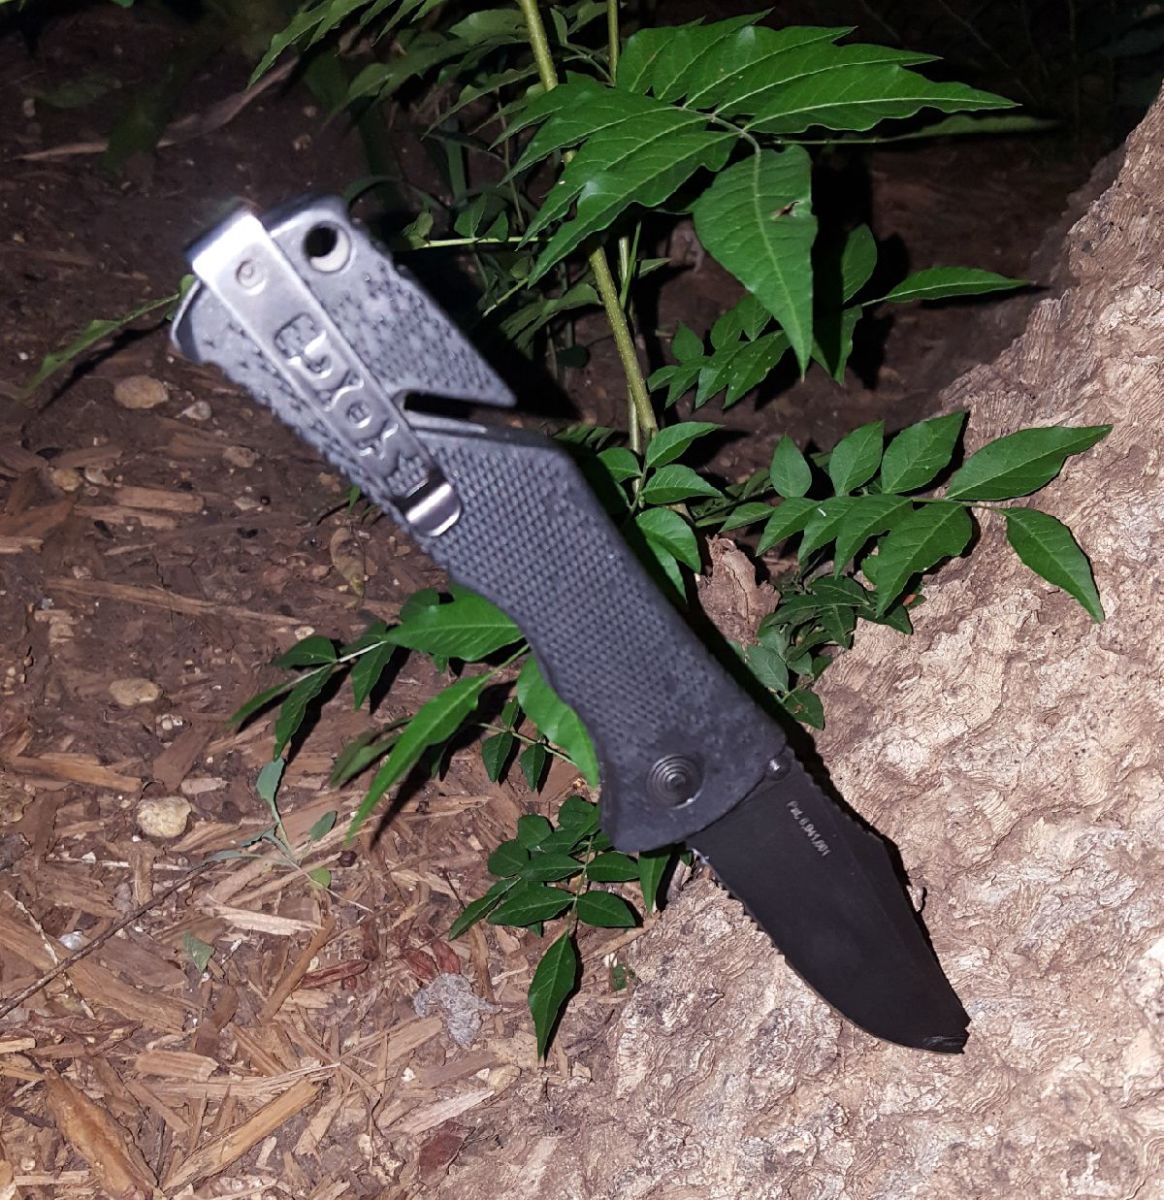 sog-trident-a-budget-friendly-tactical-knife